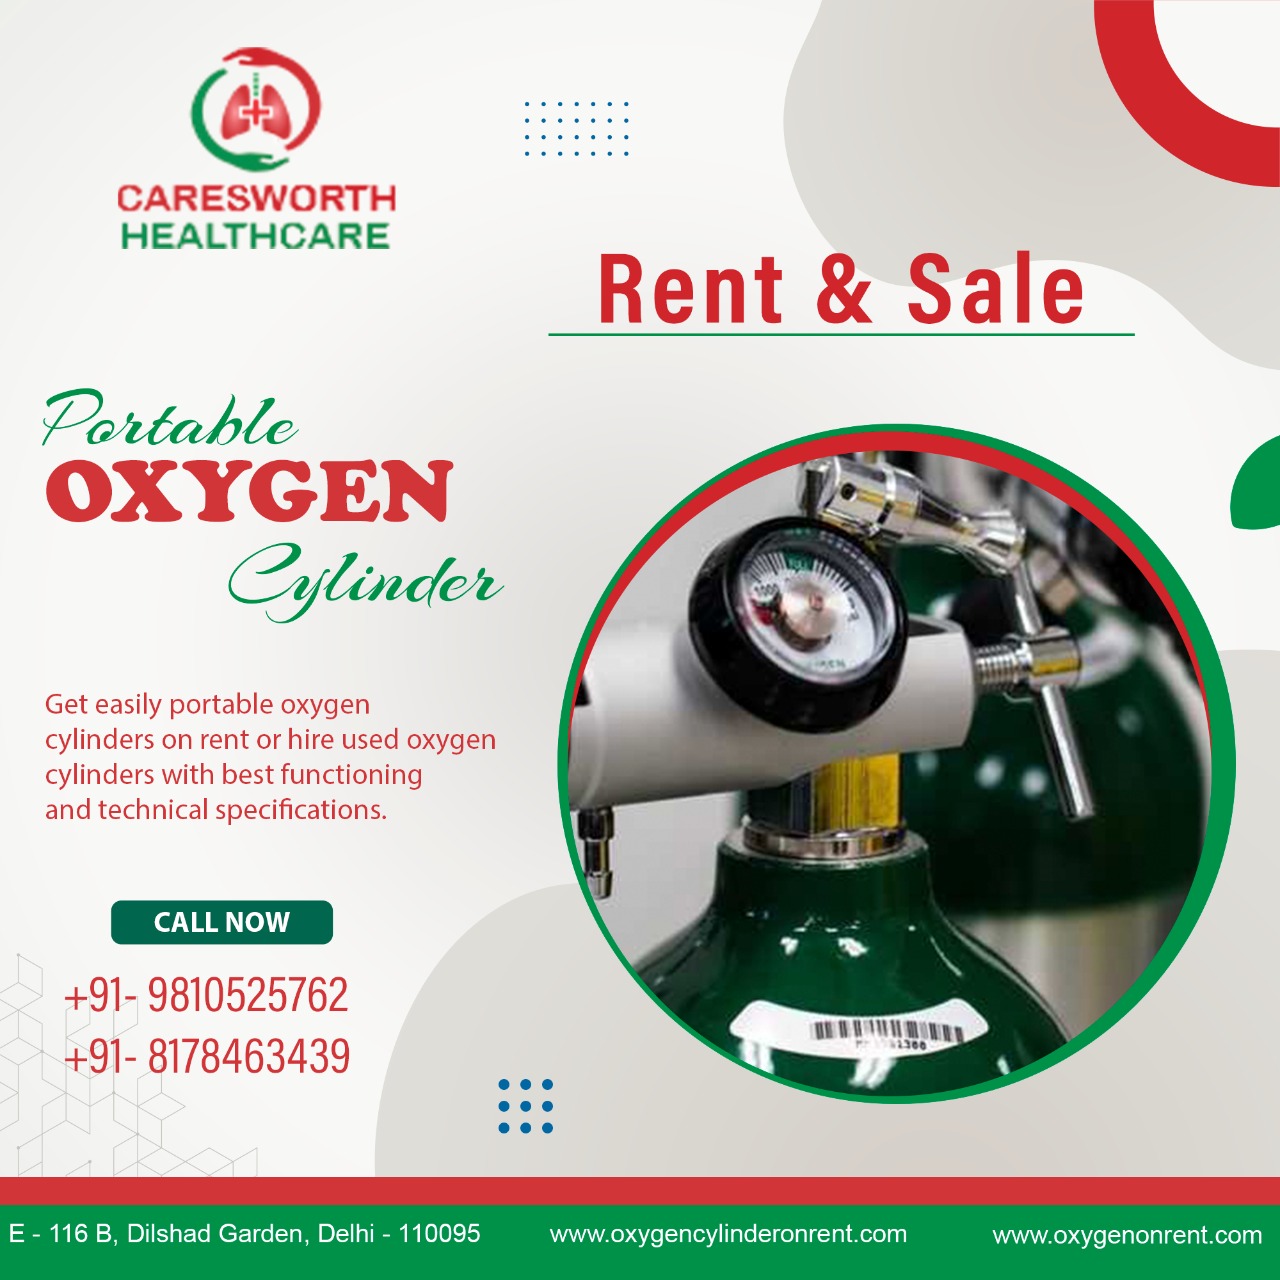 Portable Oxygen Cylinder For Rent In Noida 8178463439